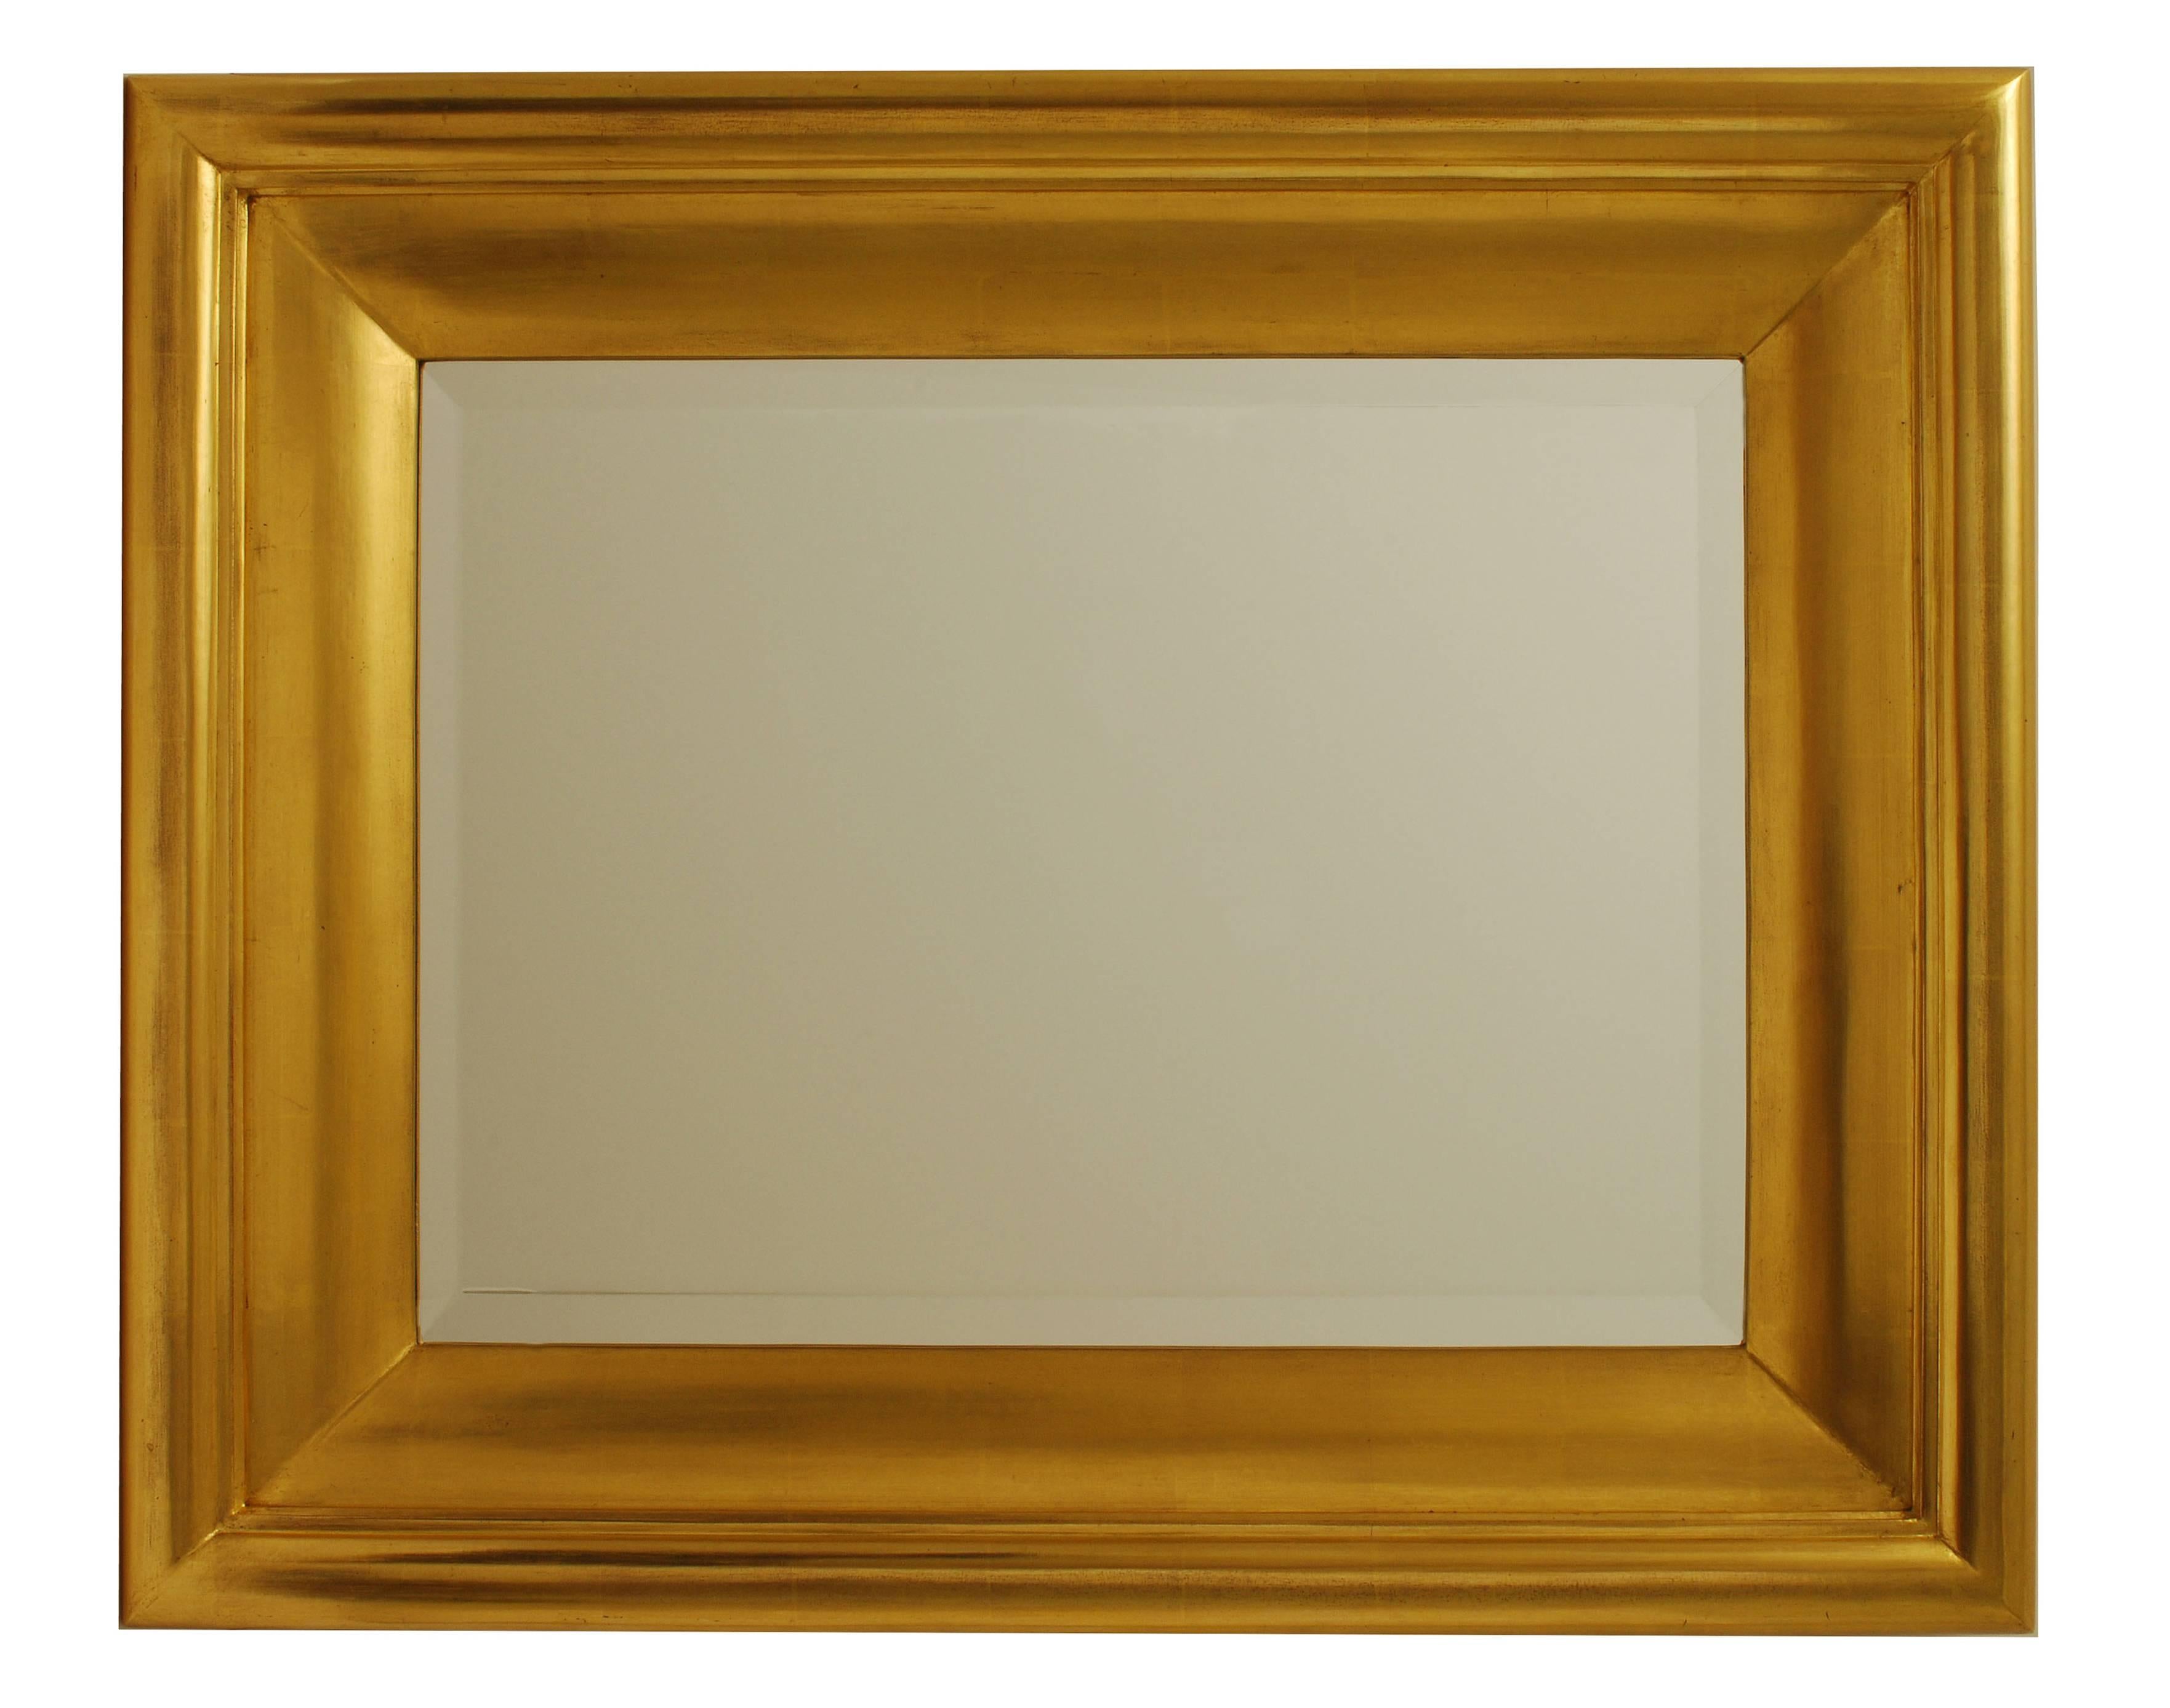 Degas No. 5 Modern Wall Mirror, Gilded in 23-Karat Yellow Gold, Bark Frameworks In Excellent Condition For Sale In Long Island City, NY